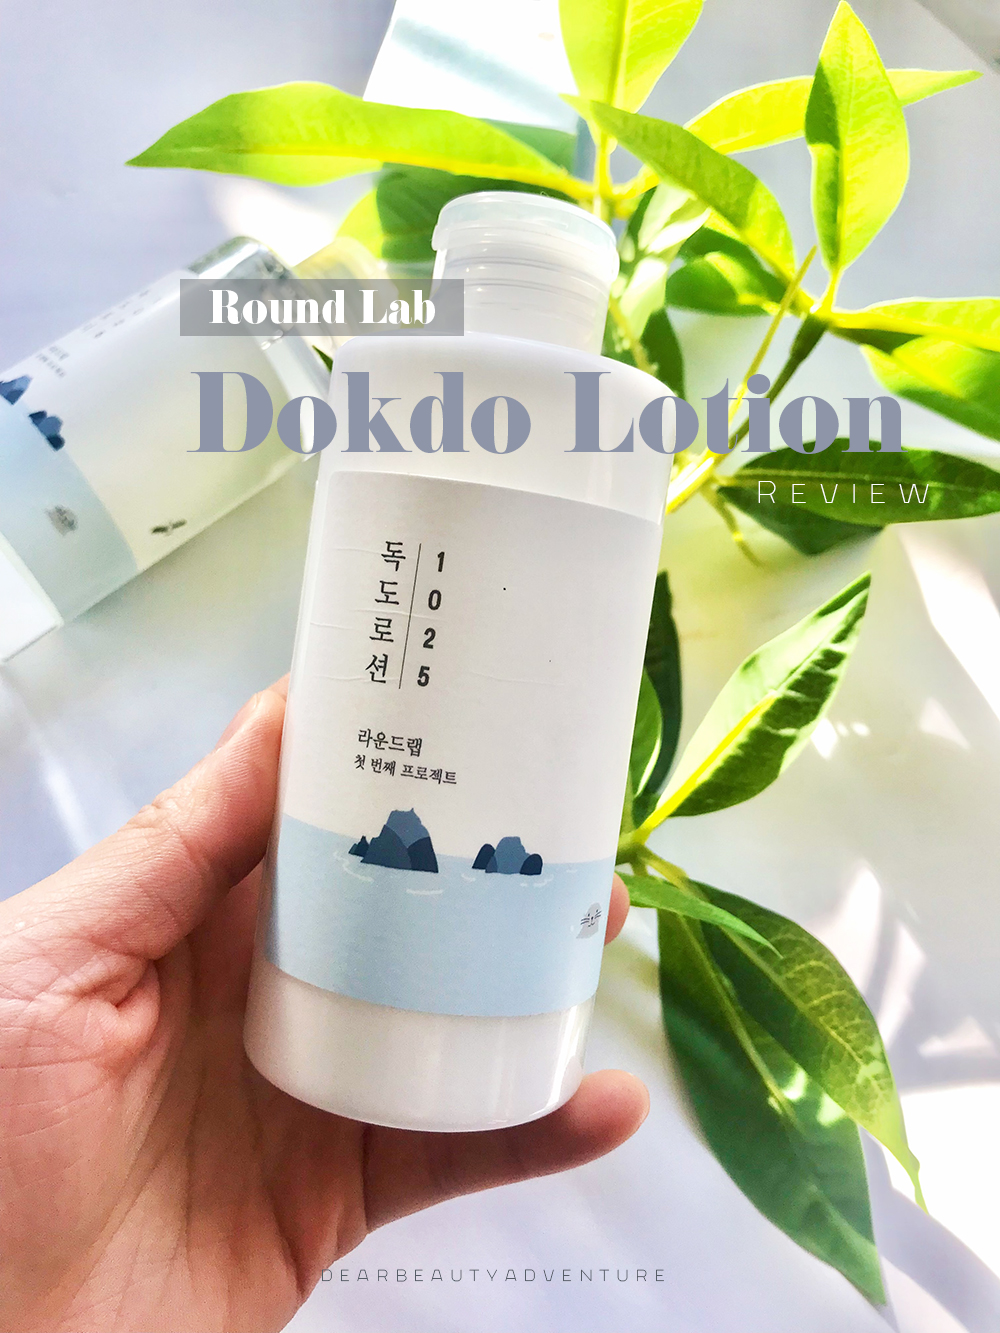 Round Lab Dokdo 1025 Lotion Review